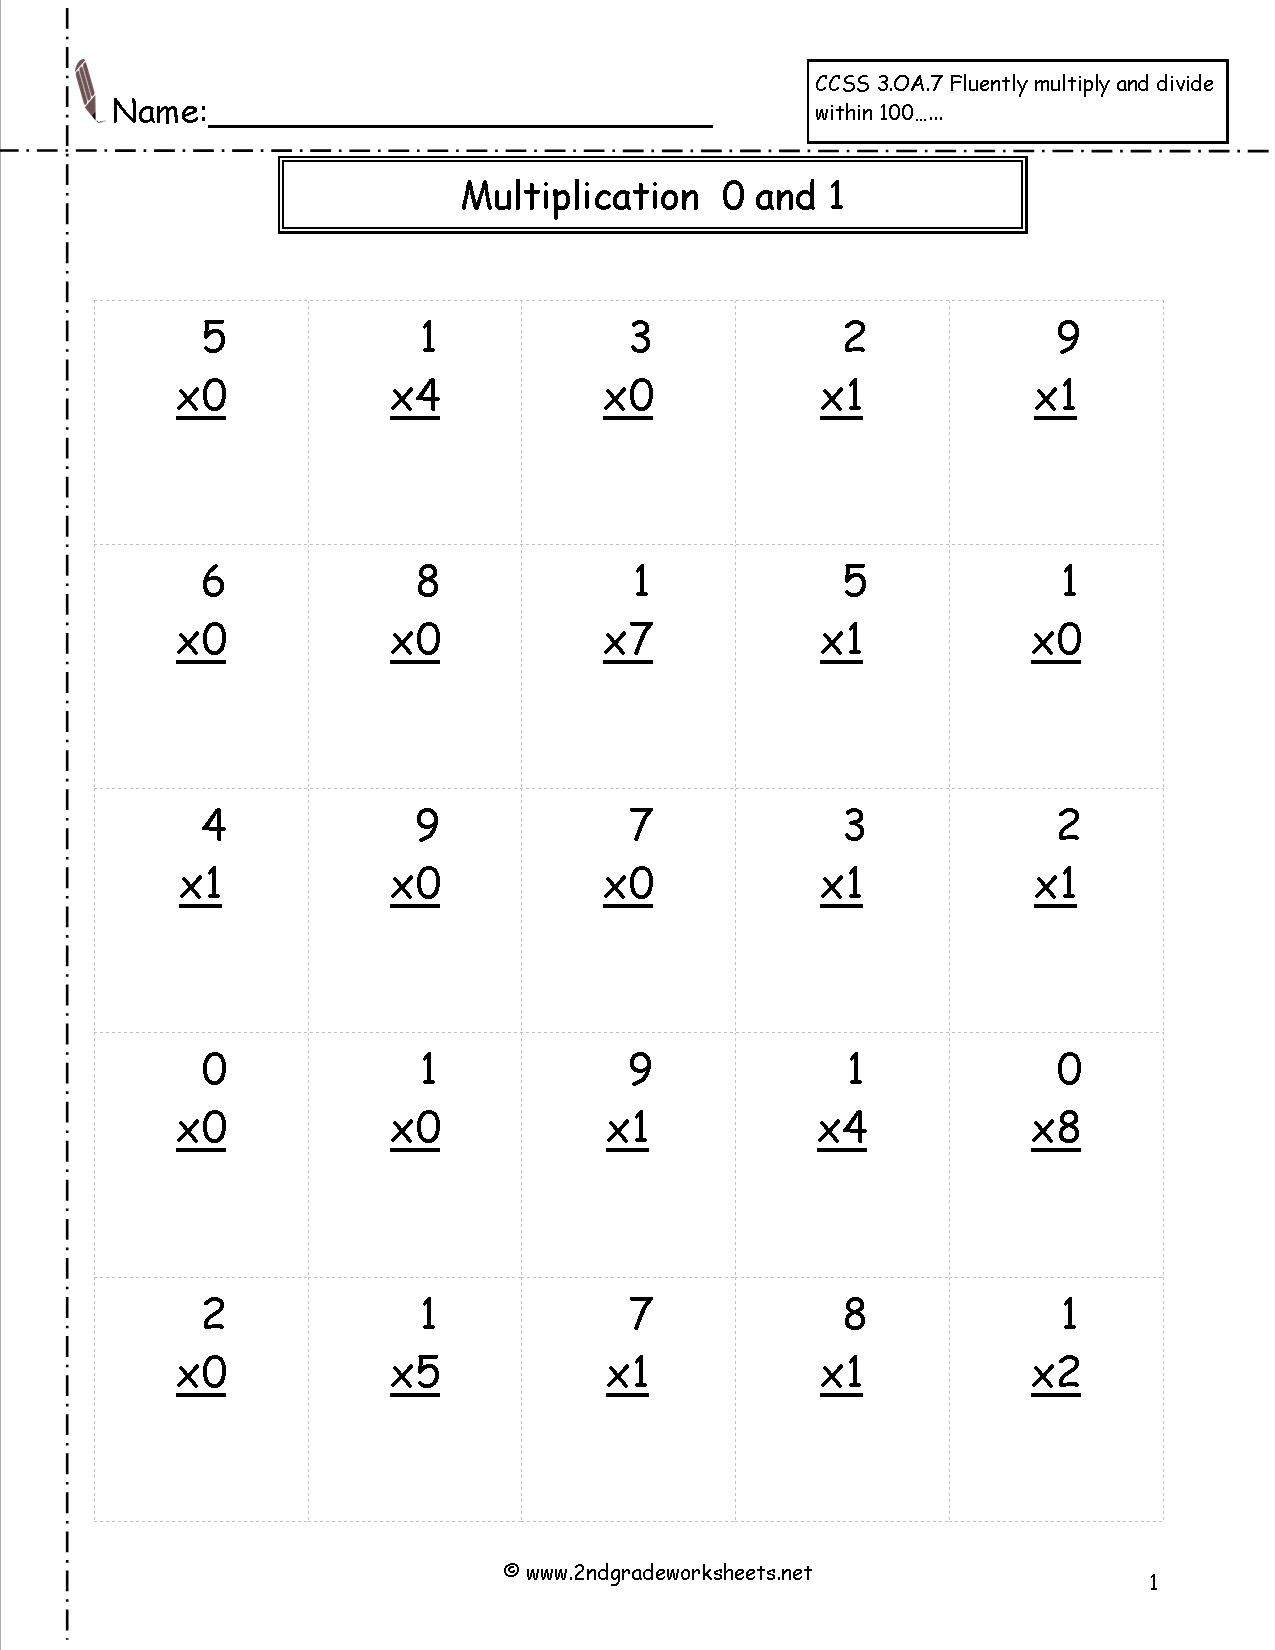 Multiplication Worksheets And Printouts inside 2 Multiplication Worksheets